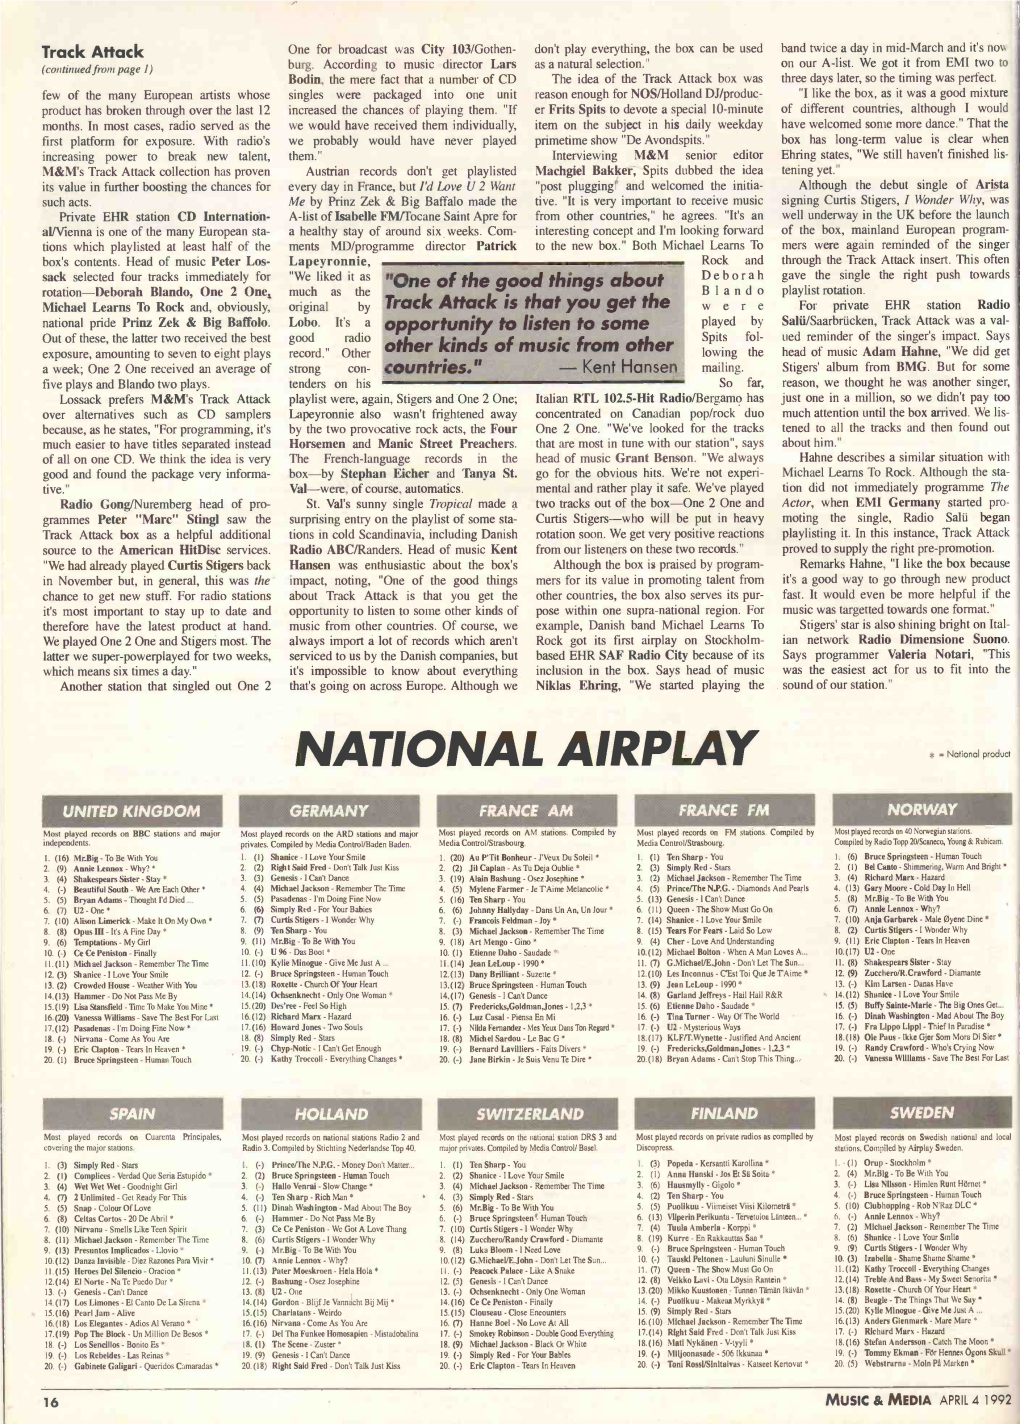 NATIONAL AIRPLAY * = National Product